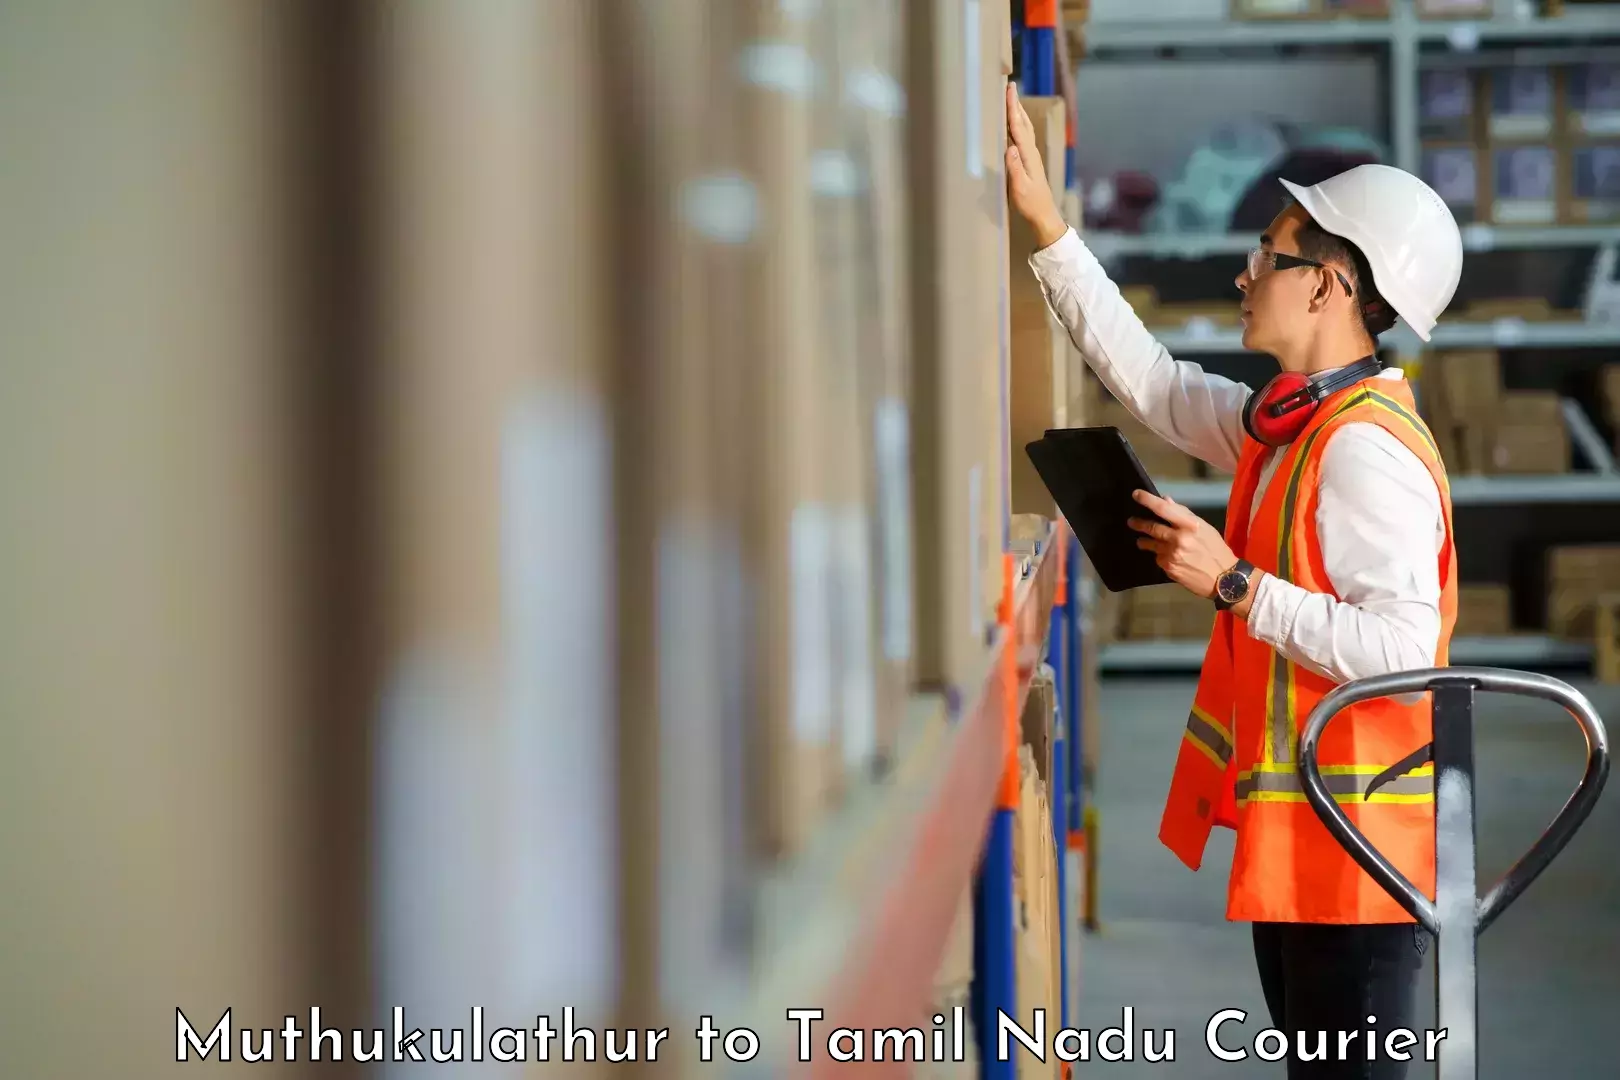 Diverse delivery methods Muthukulathur to Tamil Nadu